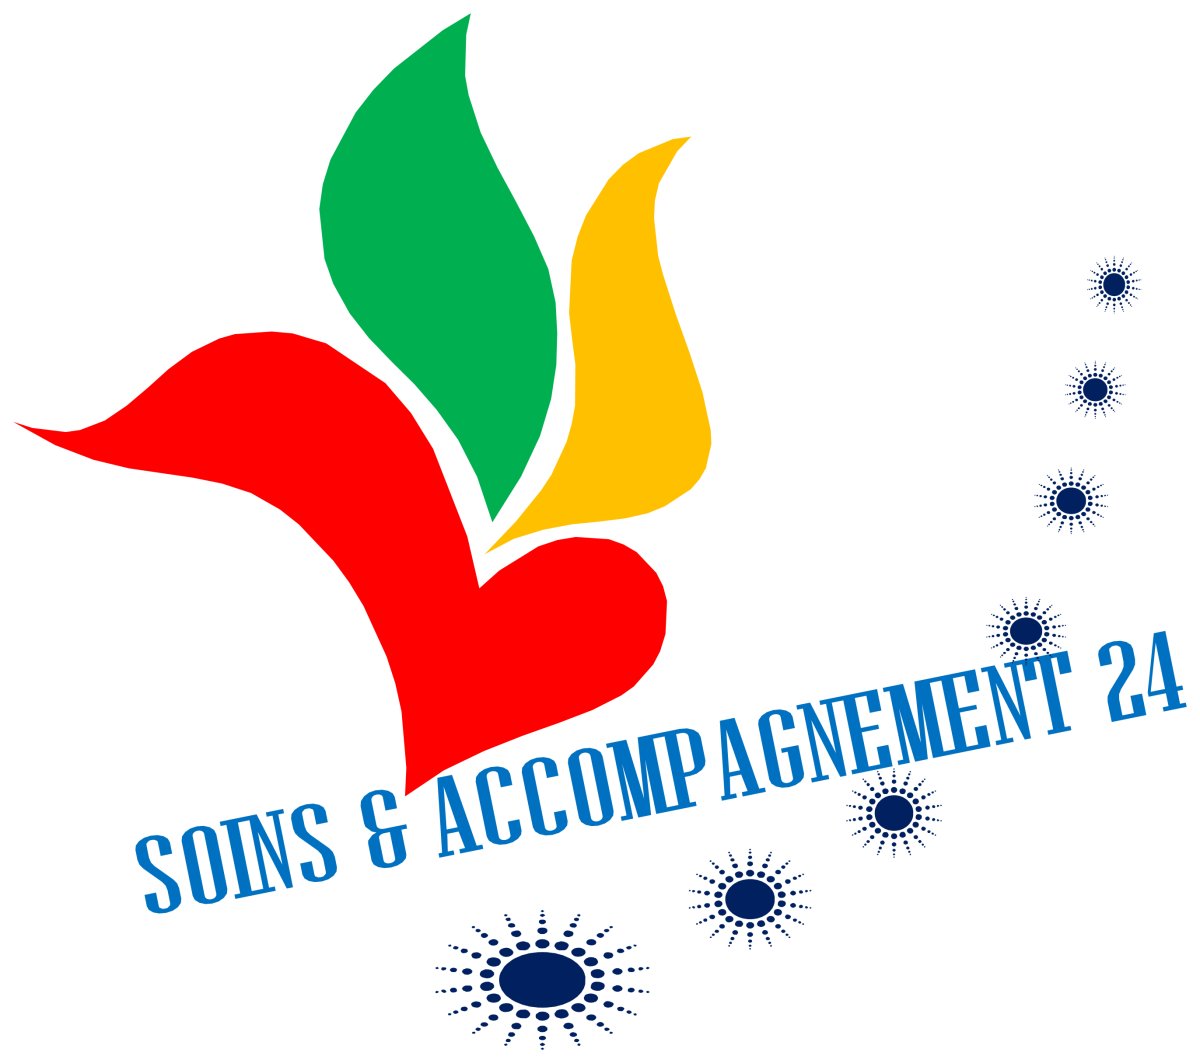 SOINS & ACCOMPAGNEMENT24